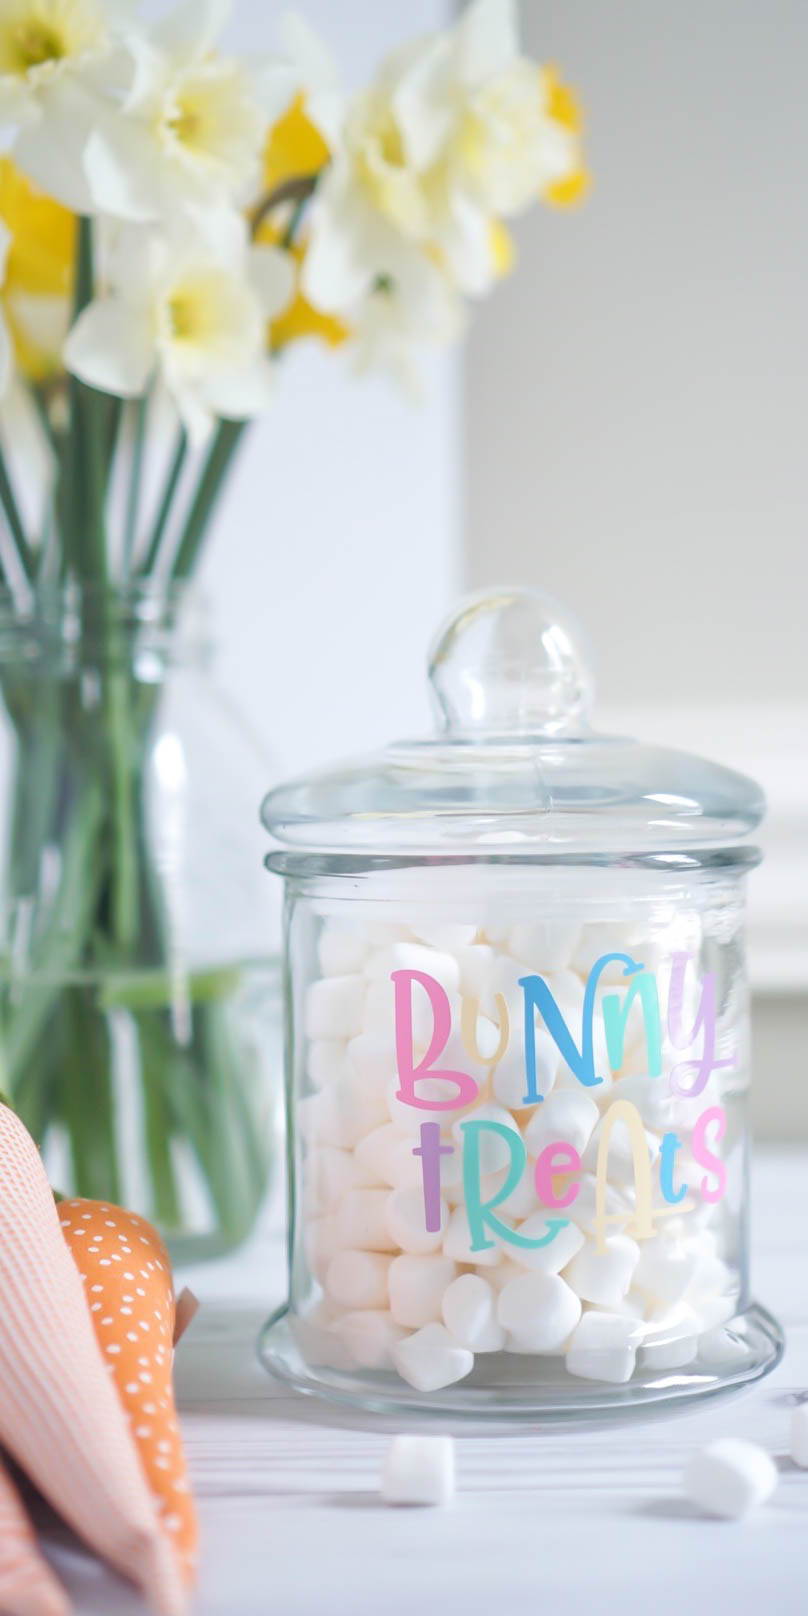 Kassa Adhesive Vinyl - DIY Project - How To Give Glass Jars New